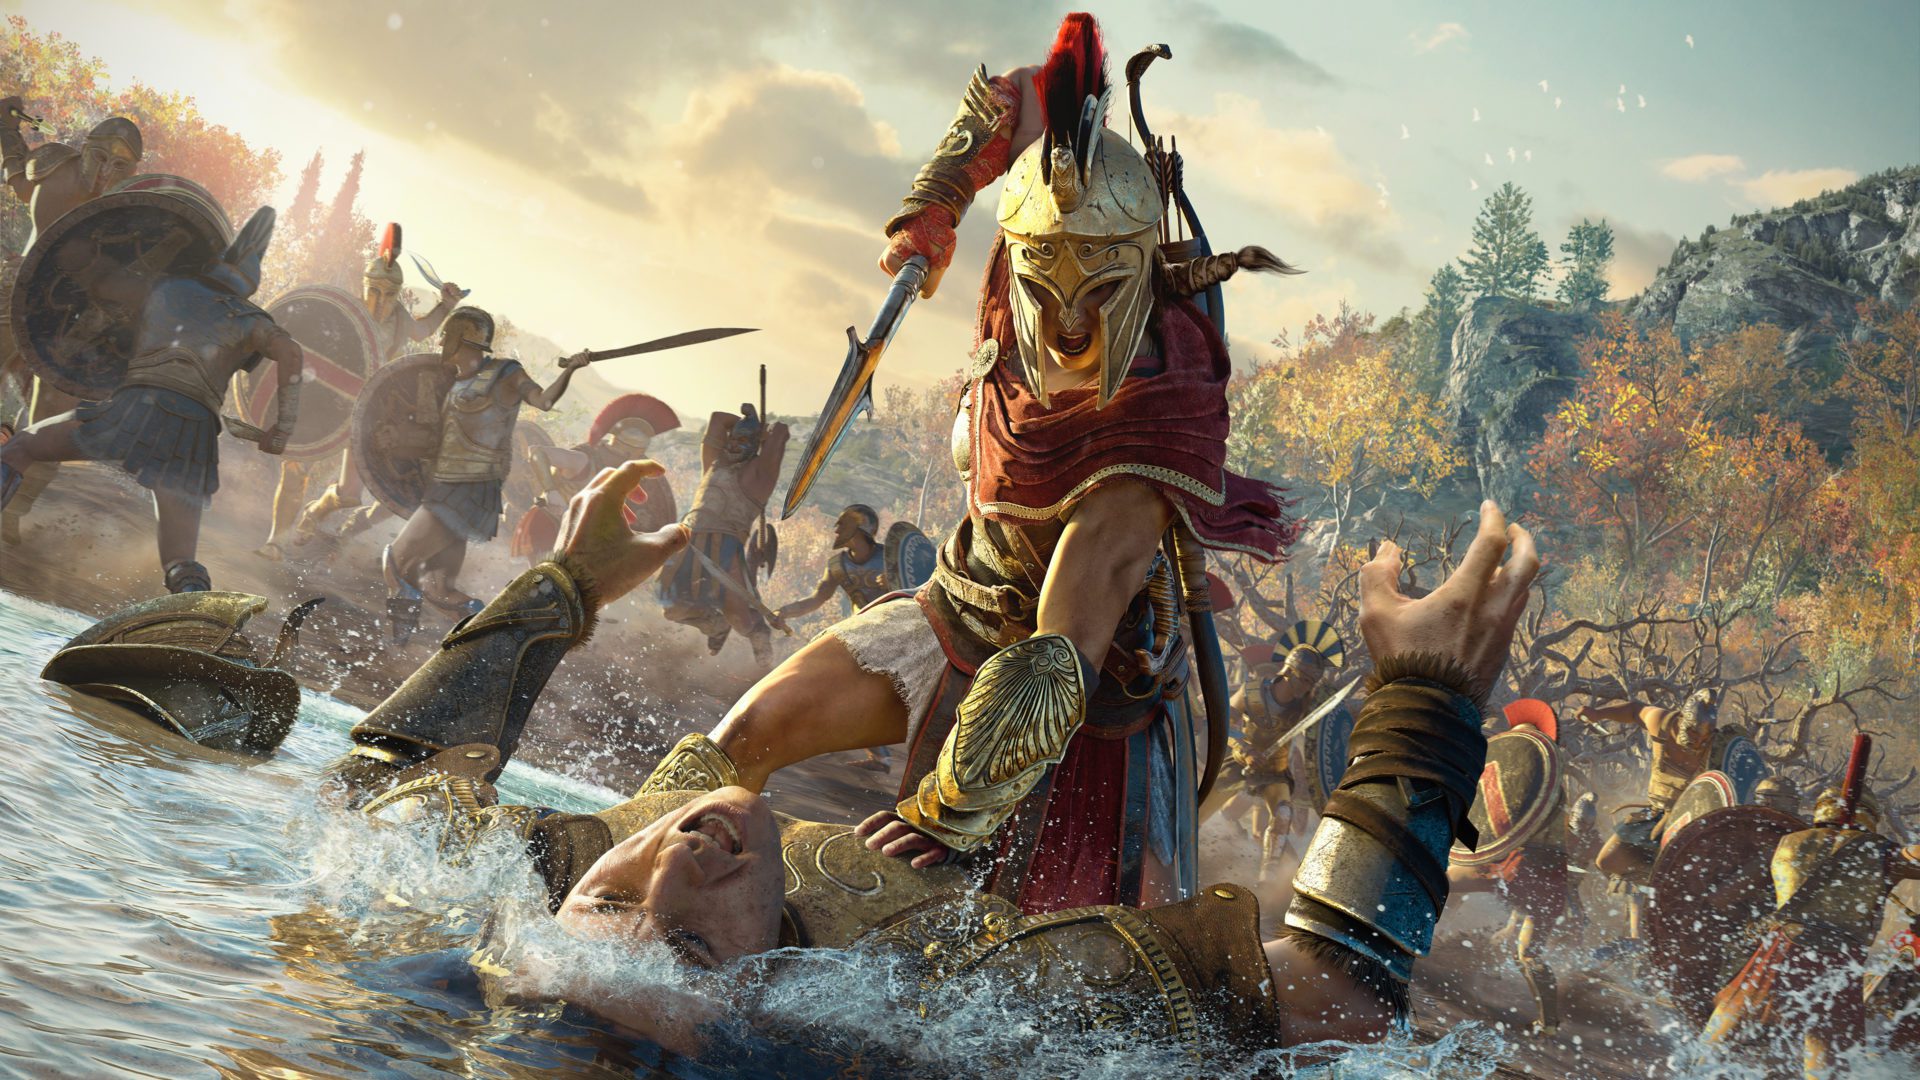 How historically accurate is Assassin's Creed Odyssey? asked professor | PCGamesN